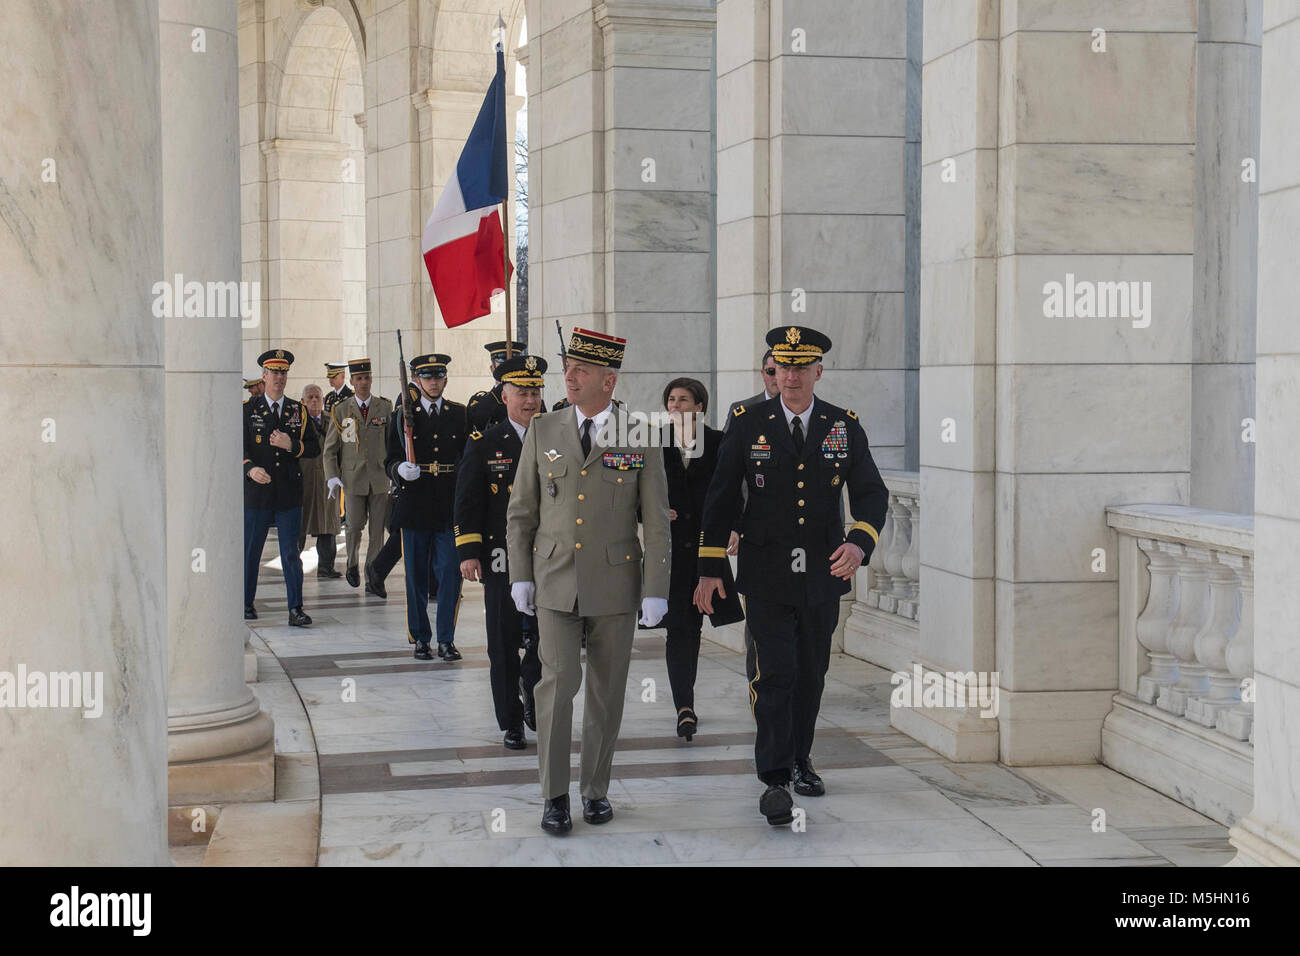 Maj. Gen. John P. Sullivan, assistant deputy chief of staff, G-4 U.S. Army guides Chief of the Defence Staff of the French Army François Lecointre on a tour of the Arlington Memorial Ampitheater Arlington National Cemetery, in Arlington, Virginia, Feb. 12, 2018 (U.S. Army Stock Photo